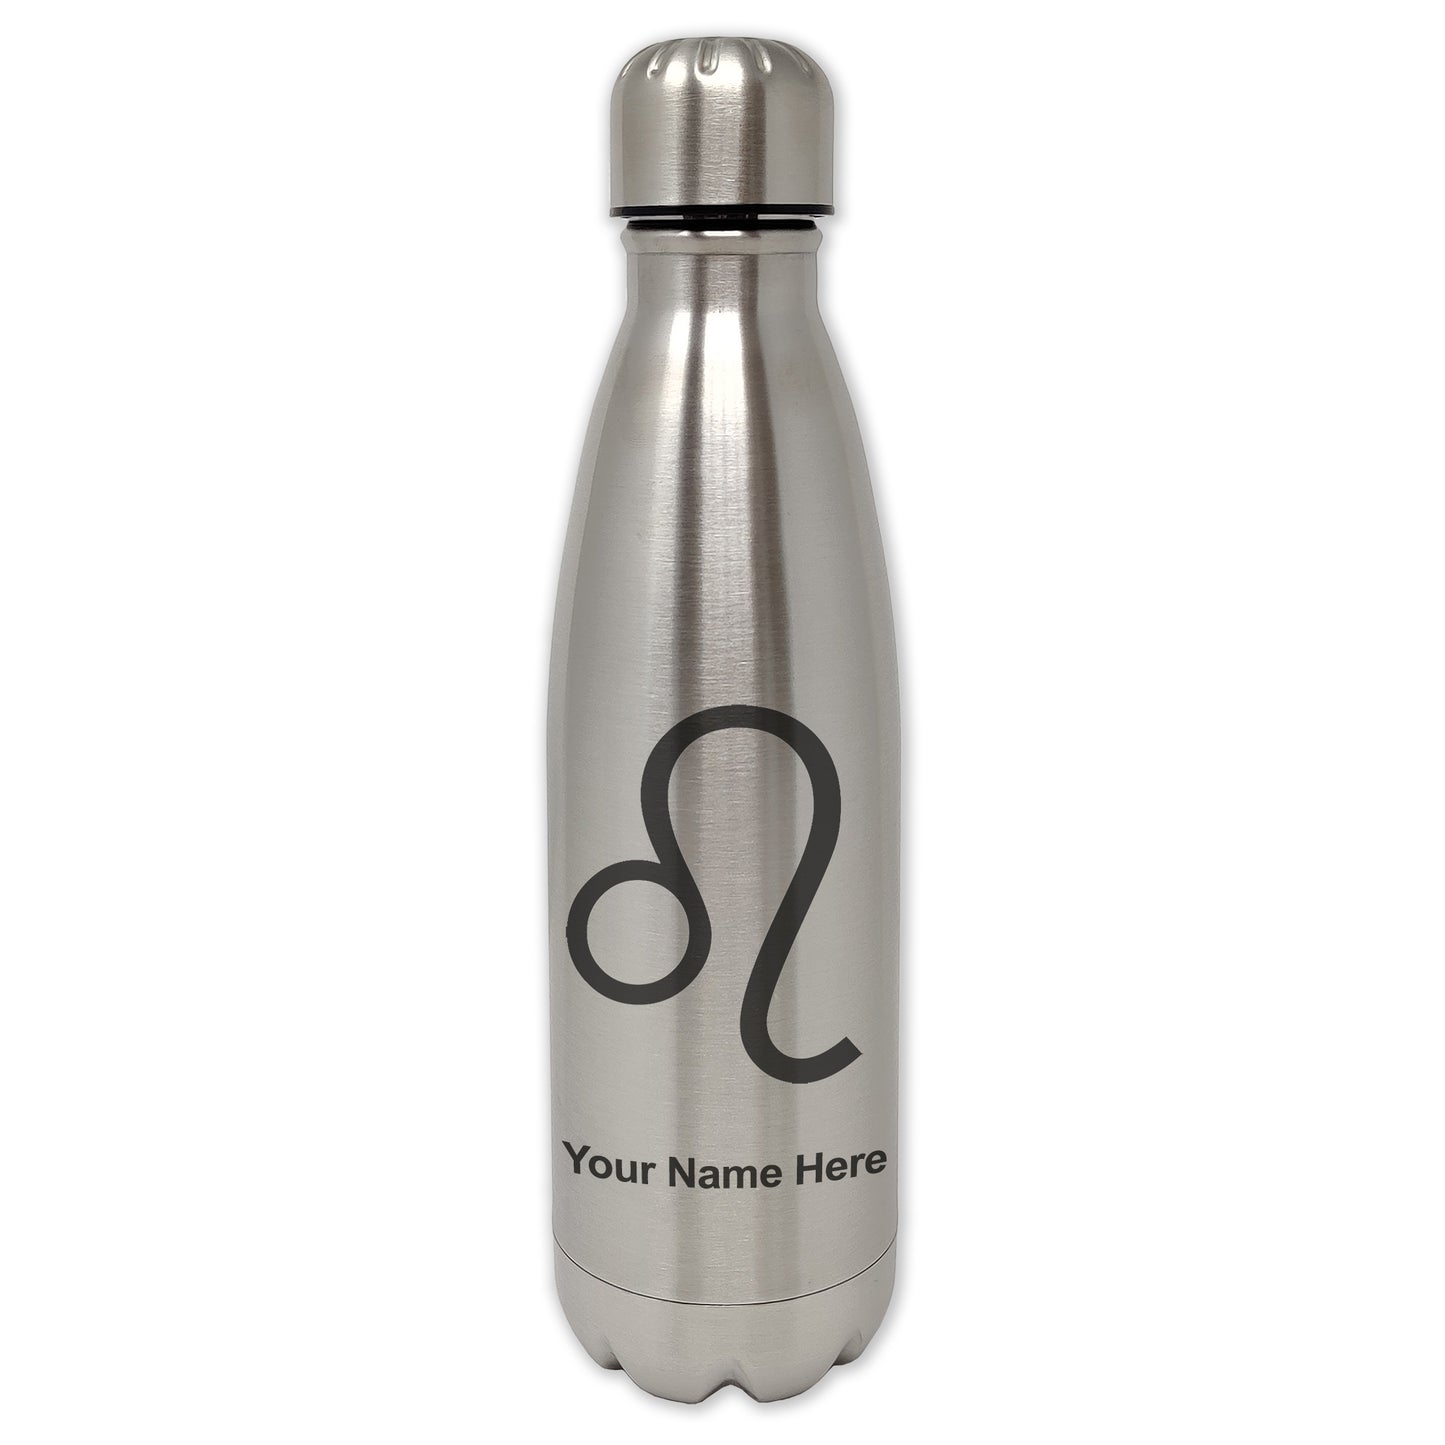 LaserGram Single Wall Water Bottle, Zodiac Sign Leo, Personalized Engraving Included